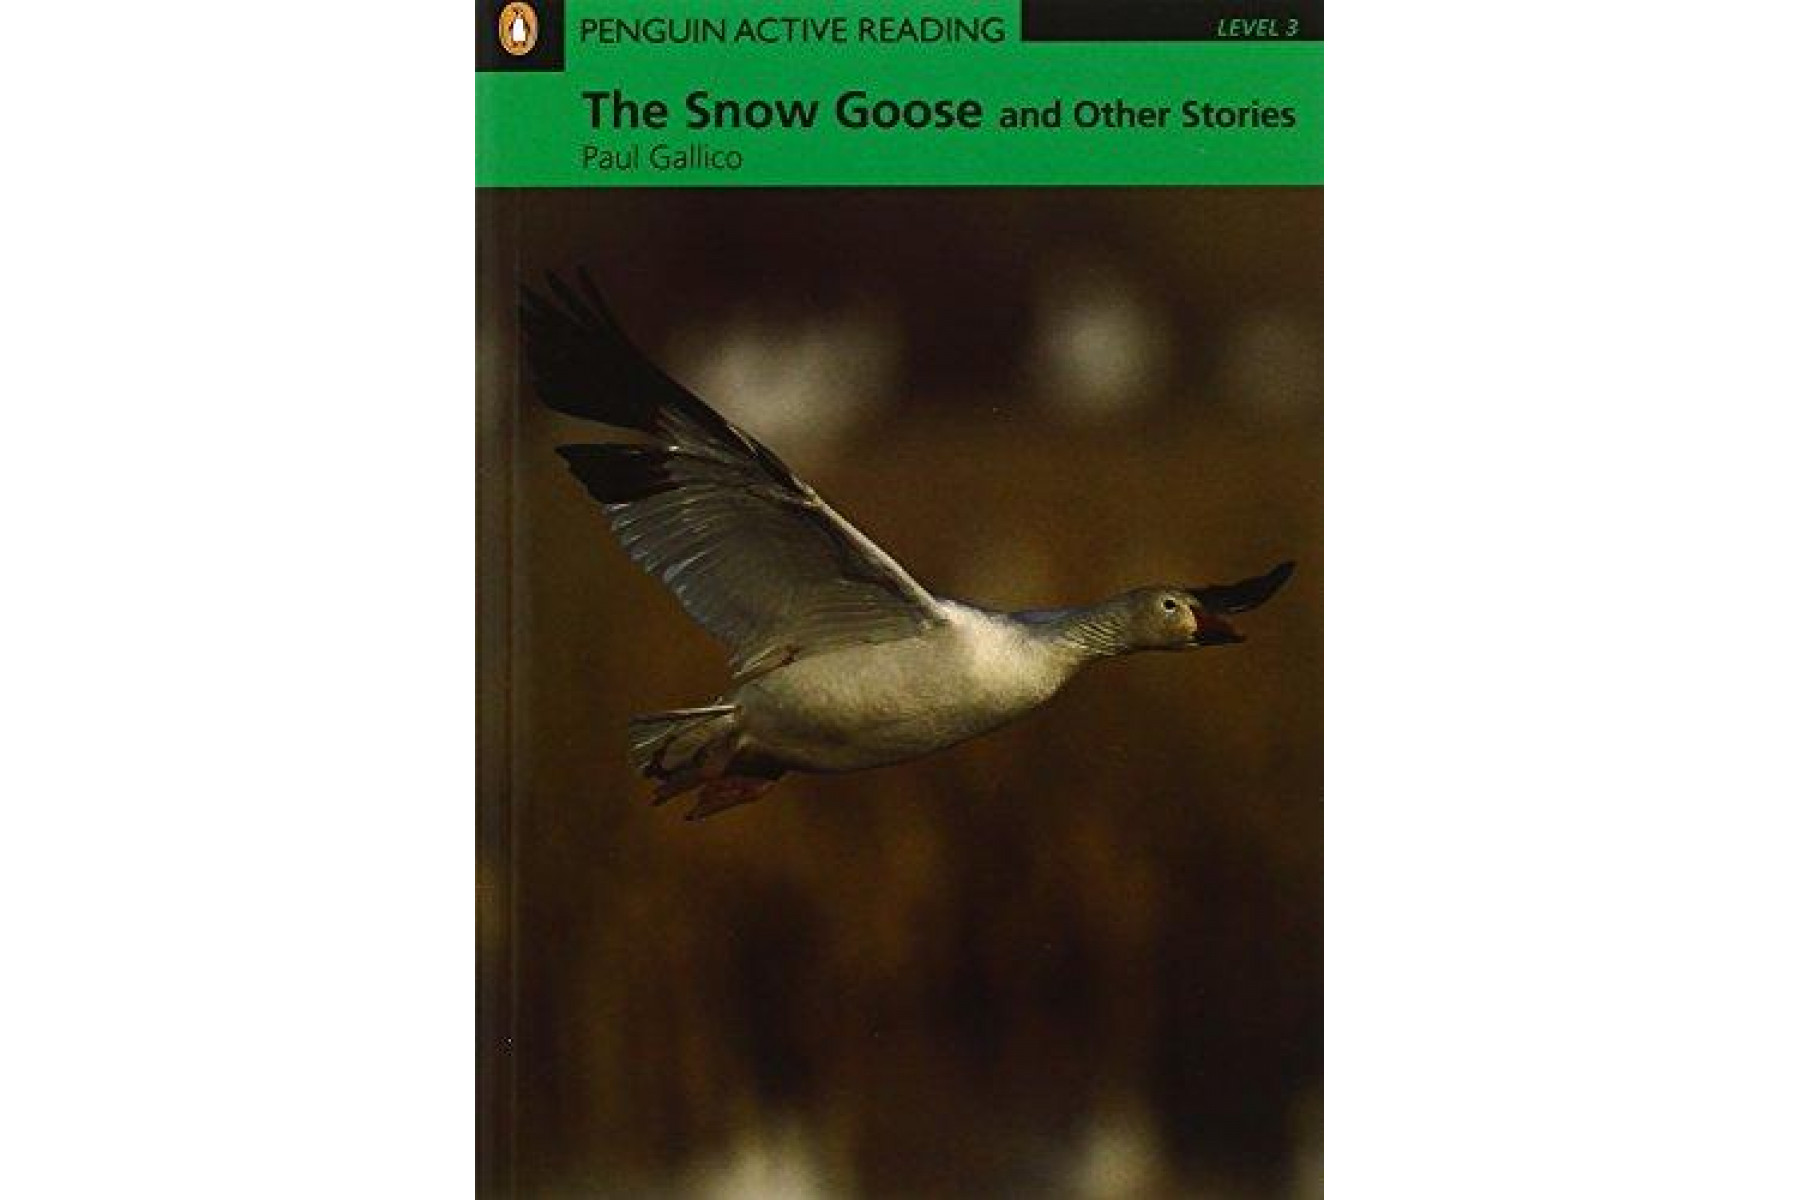 PAR 3 : The Snow Goose and Other Stories Book and CD-ROM Pack